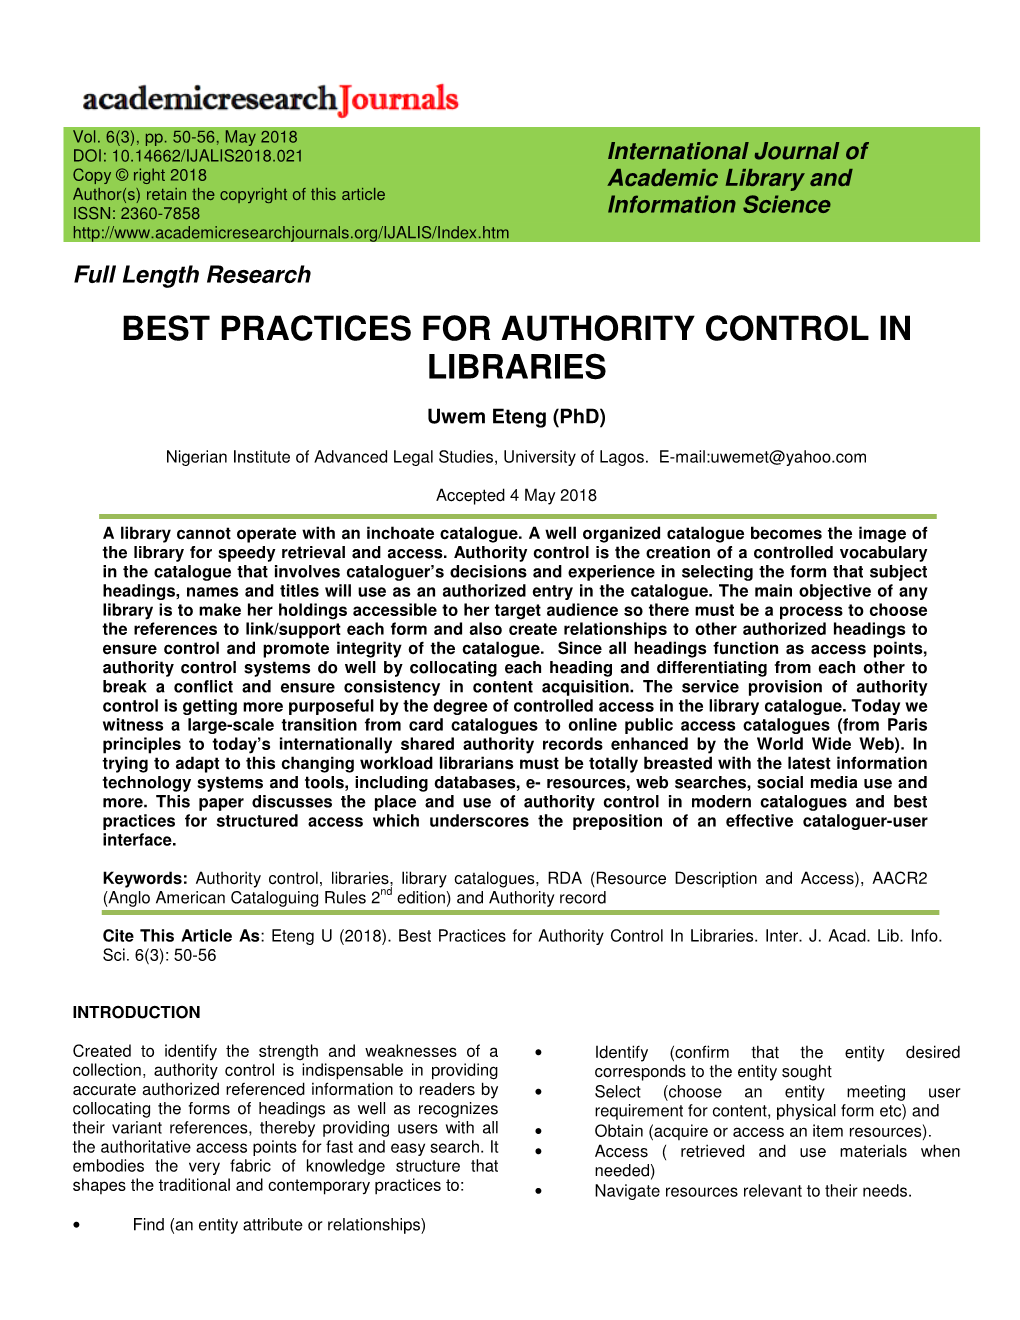 Best Practices for Authority Control in Libraries